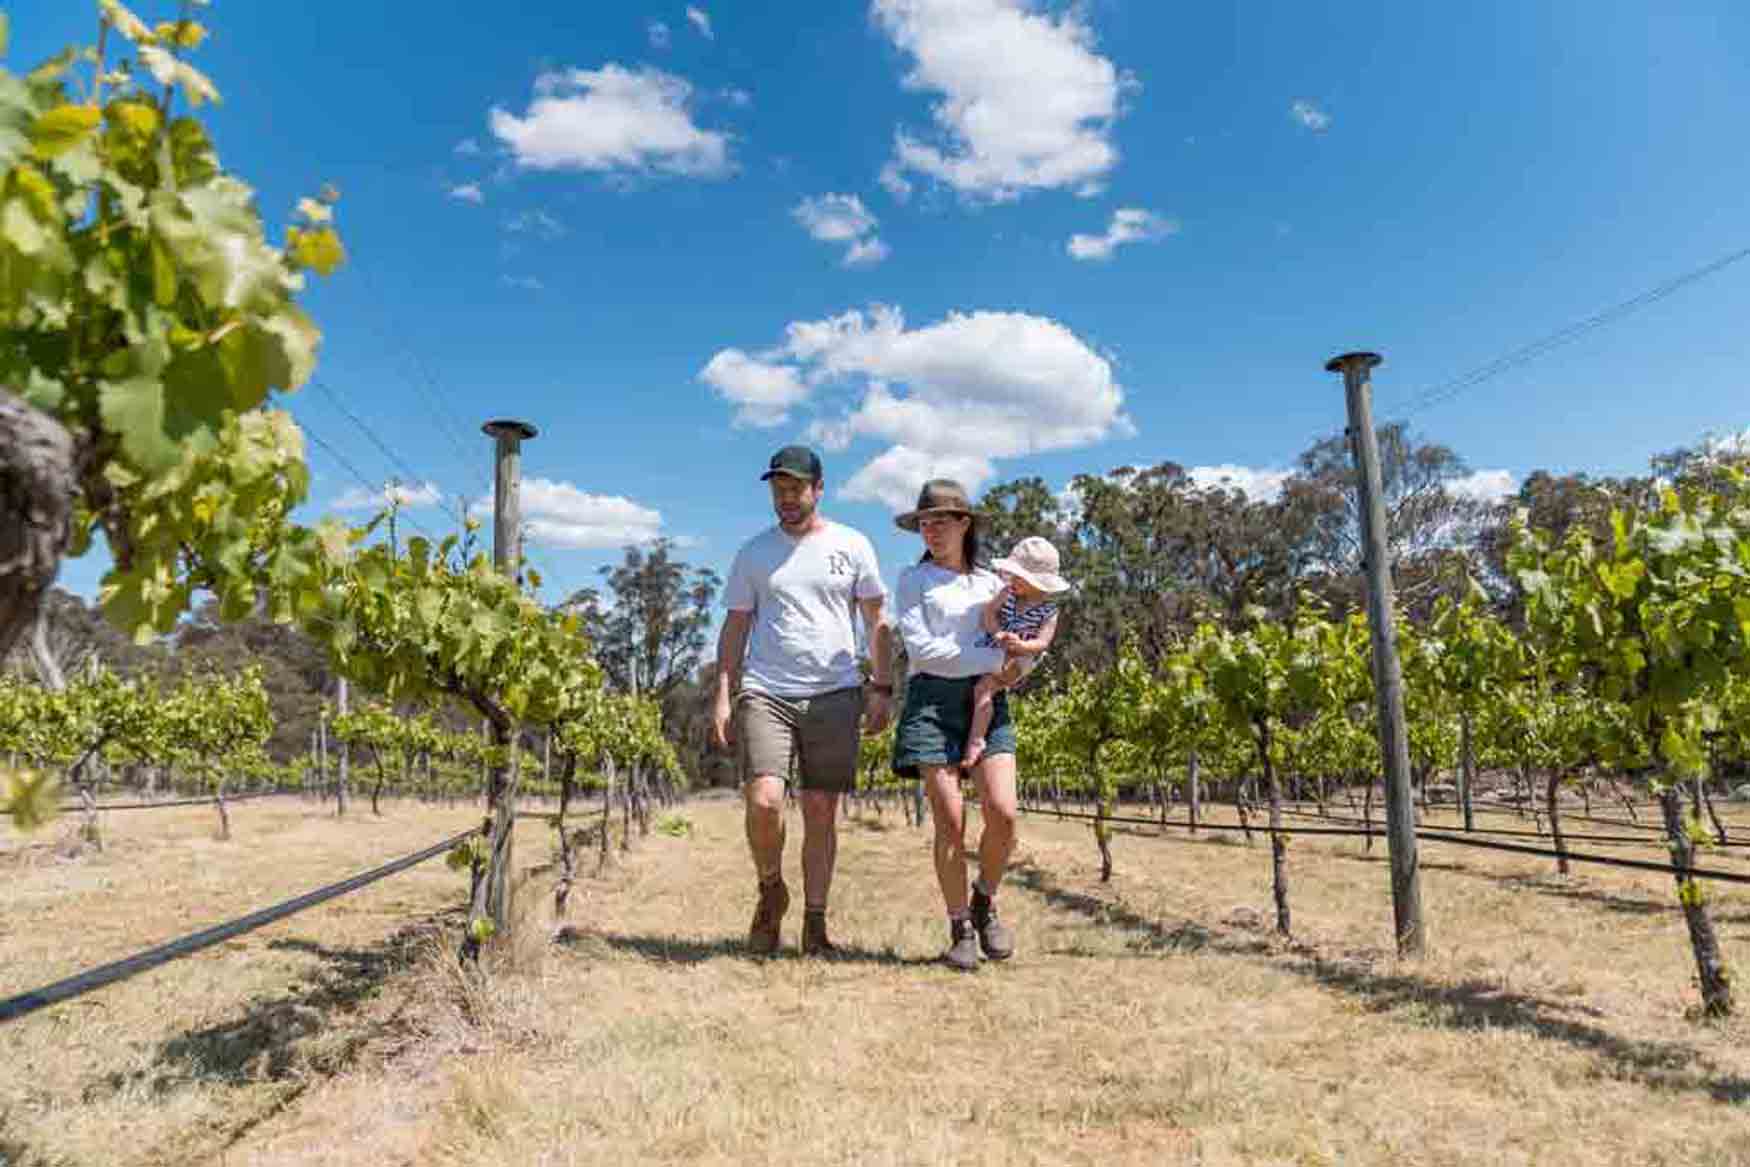 Nick and Caitline Roberts with their child walk through the vineyards